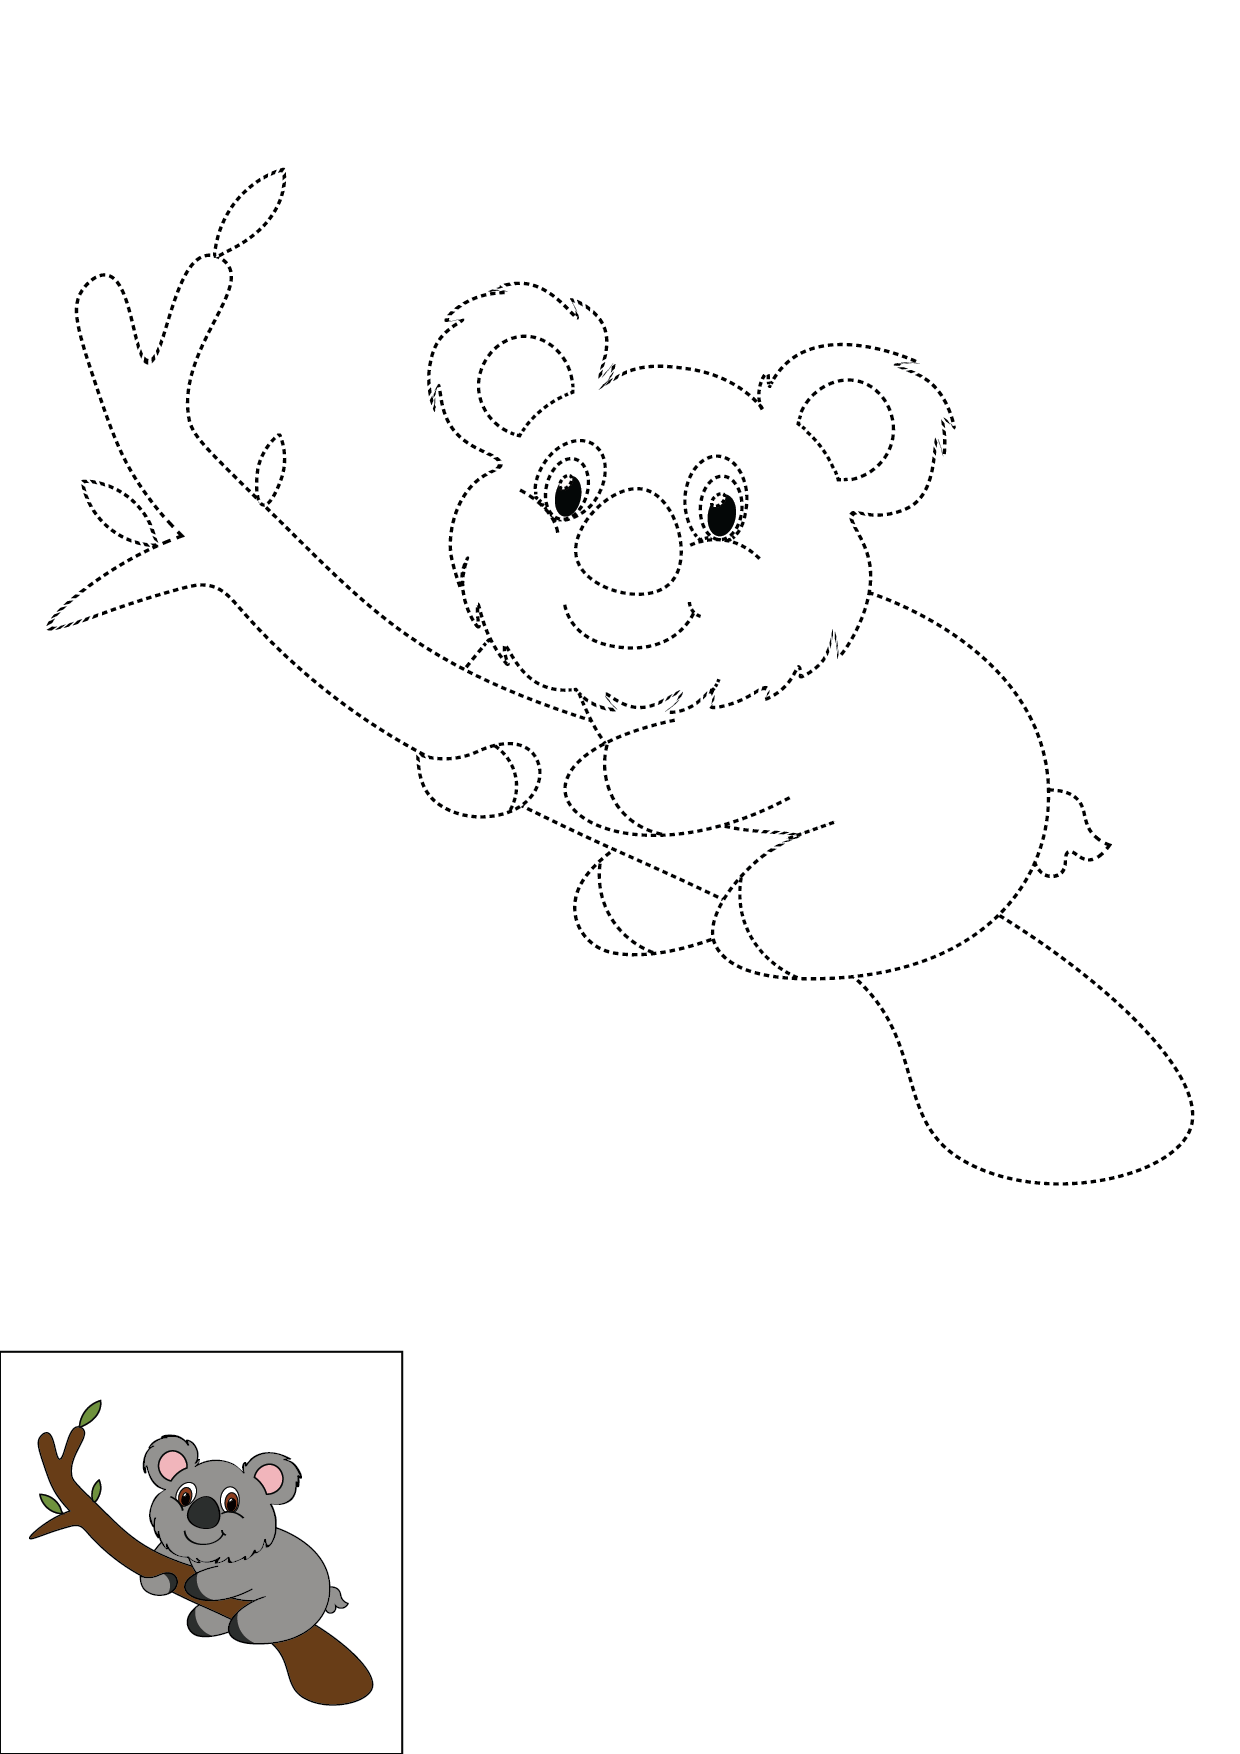 How to Draw A Koala Step by Step Printable Dotted